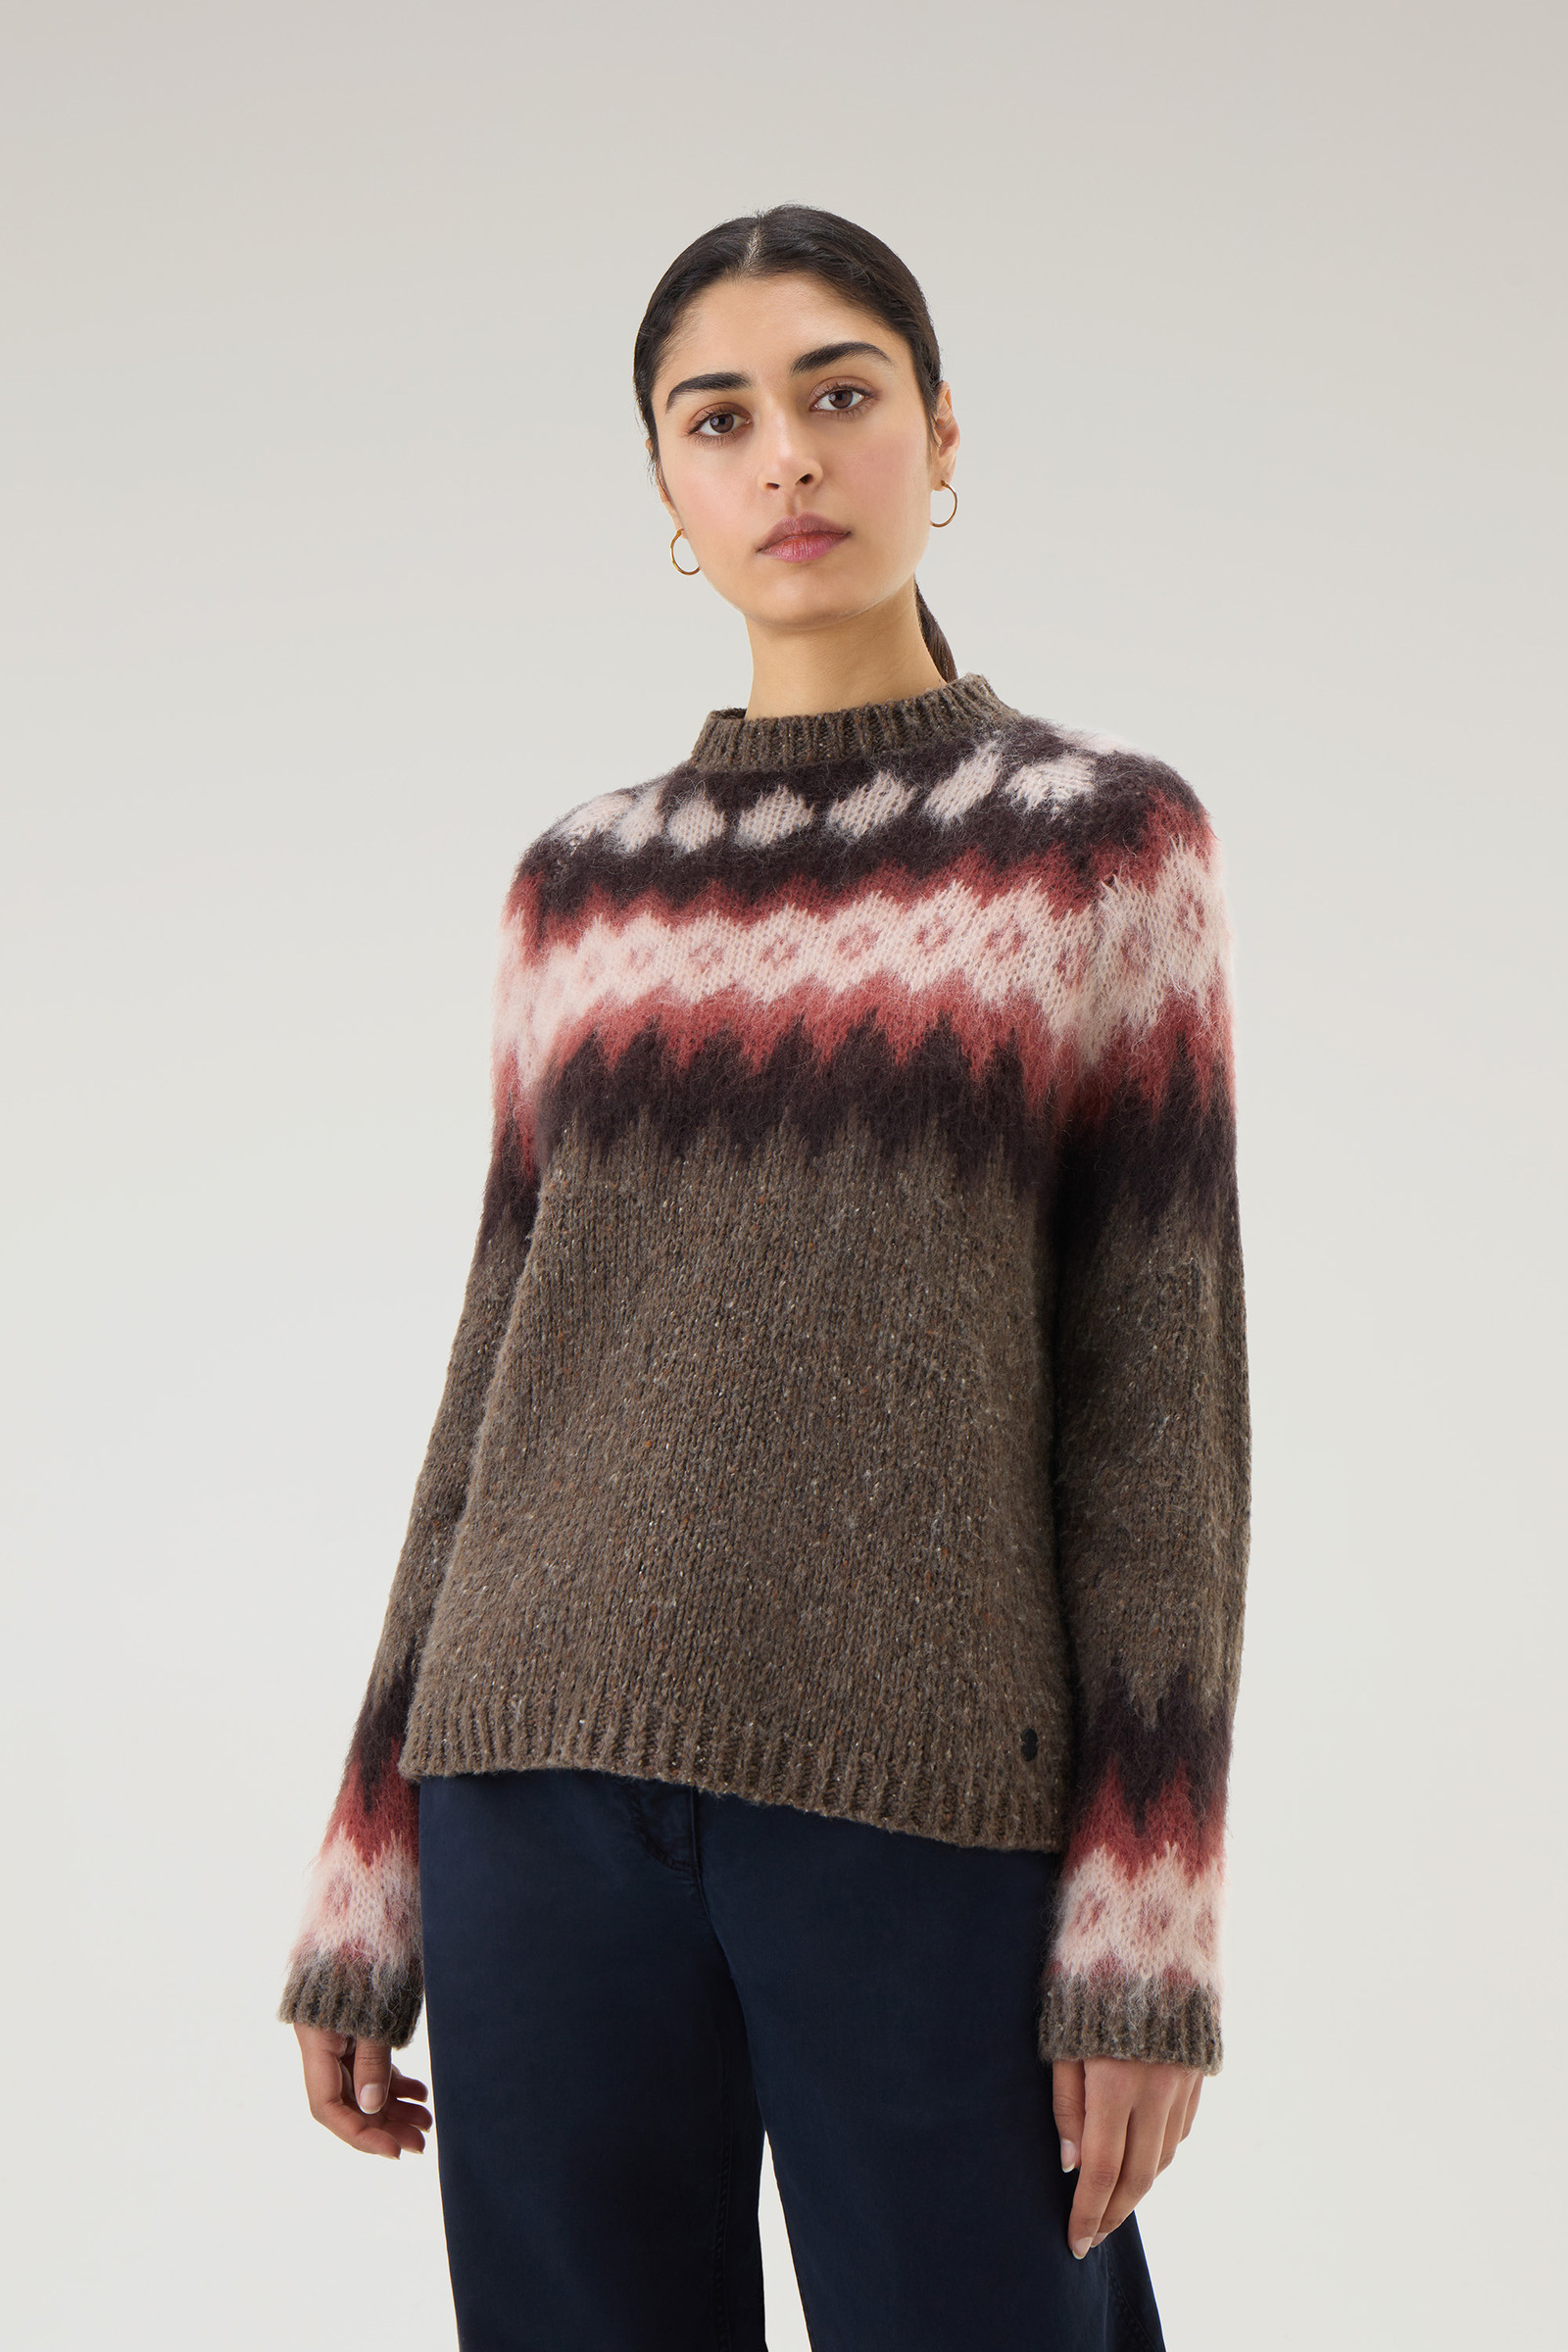 Women's Fair Isle Pullover in Wool and Mohair Blend Brown | Woolrich USA